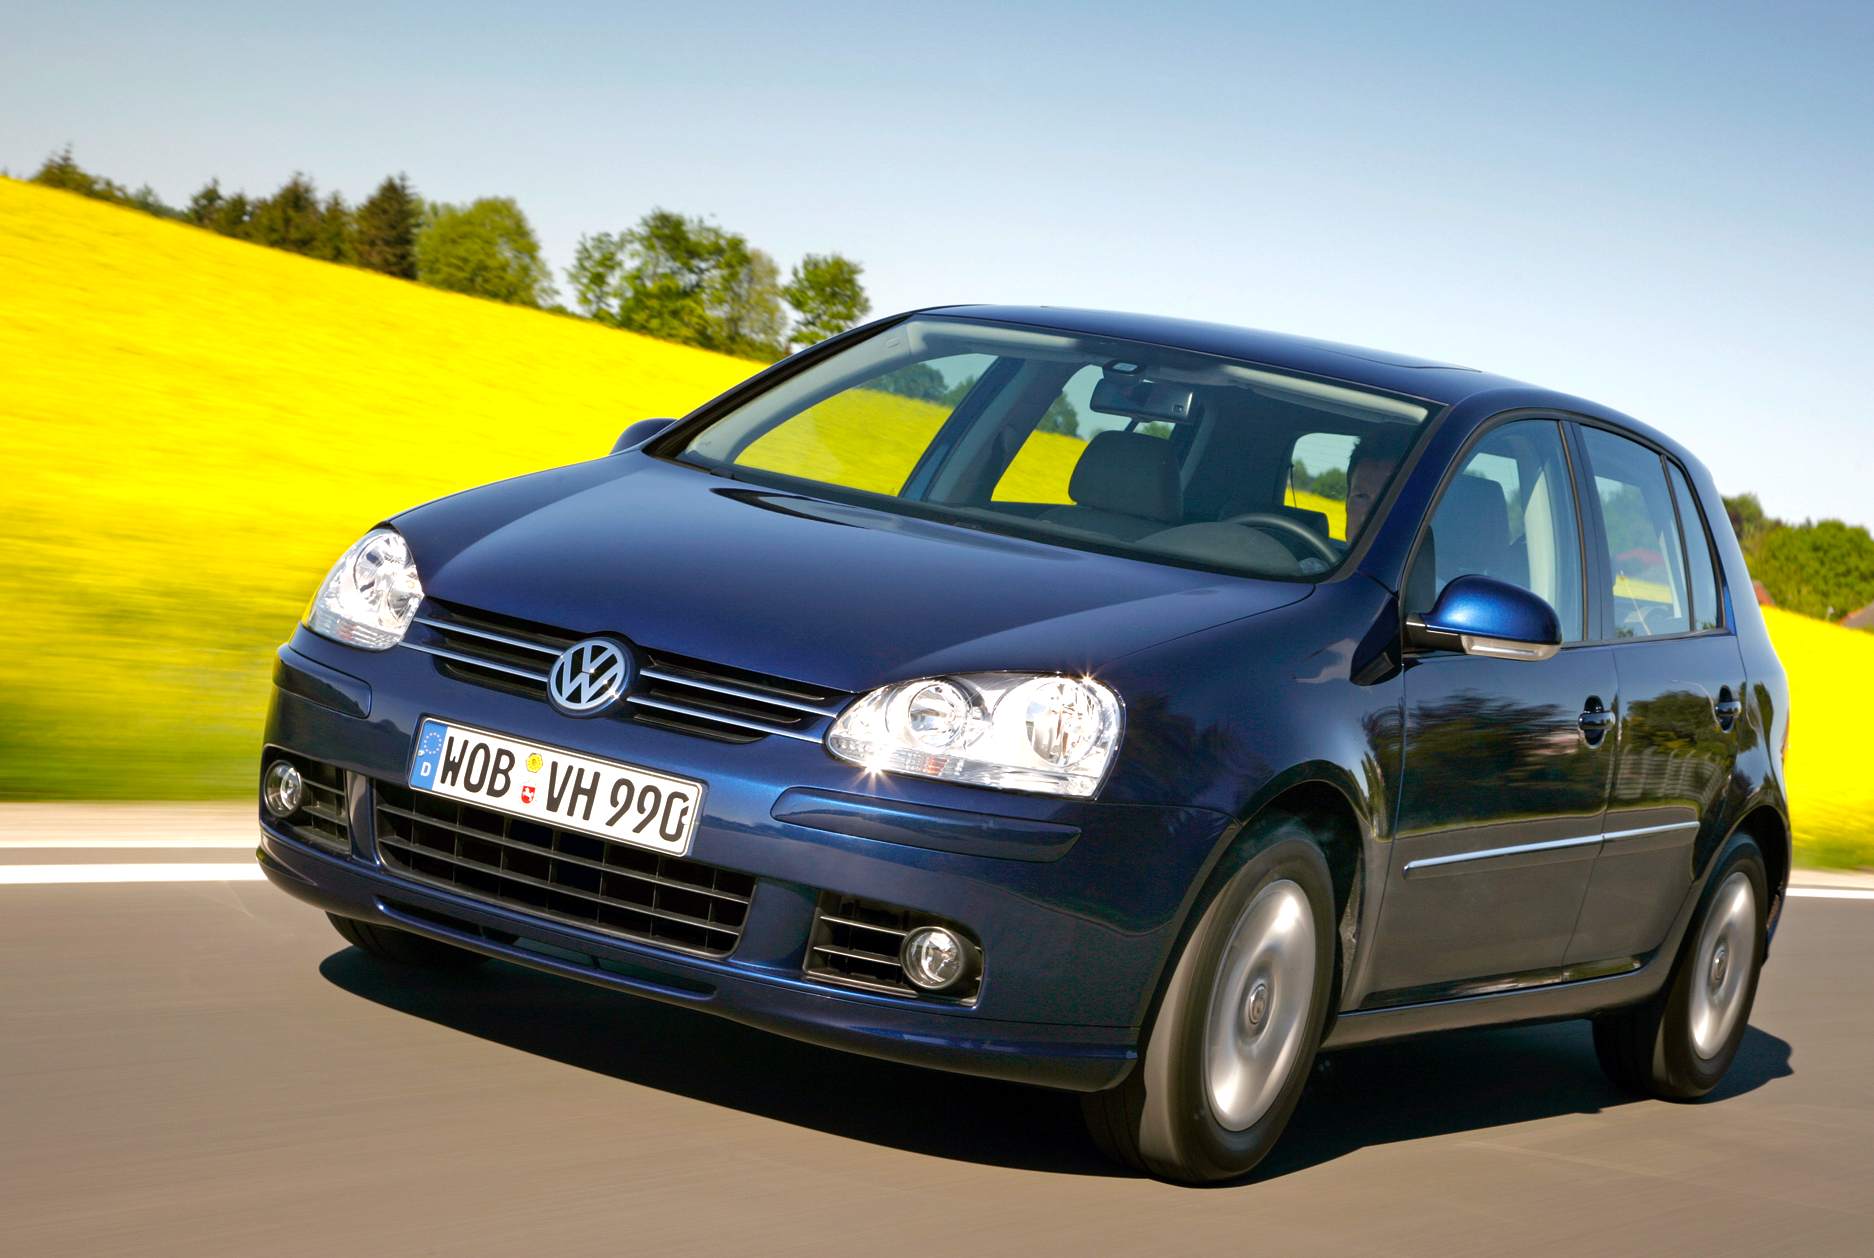 Europe 2005 VW Golf keeps Opel Astra at bay, or does it